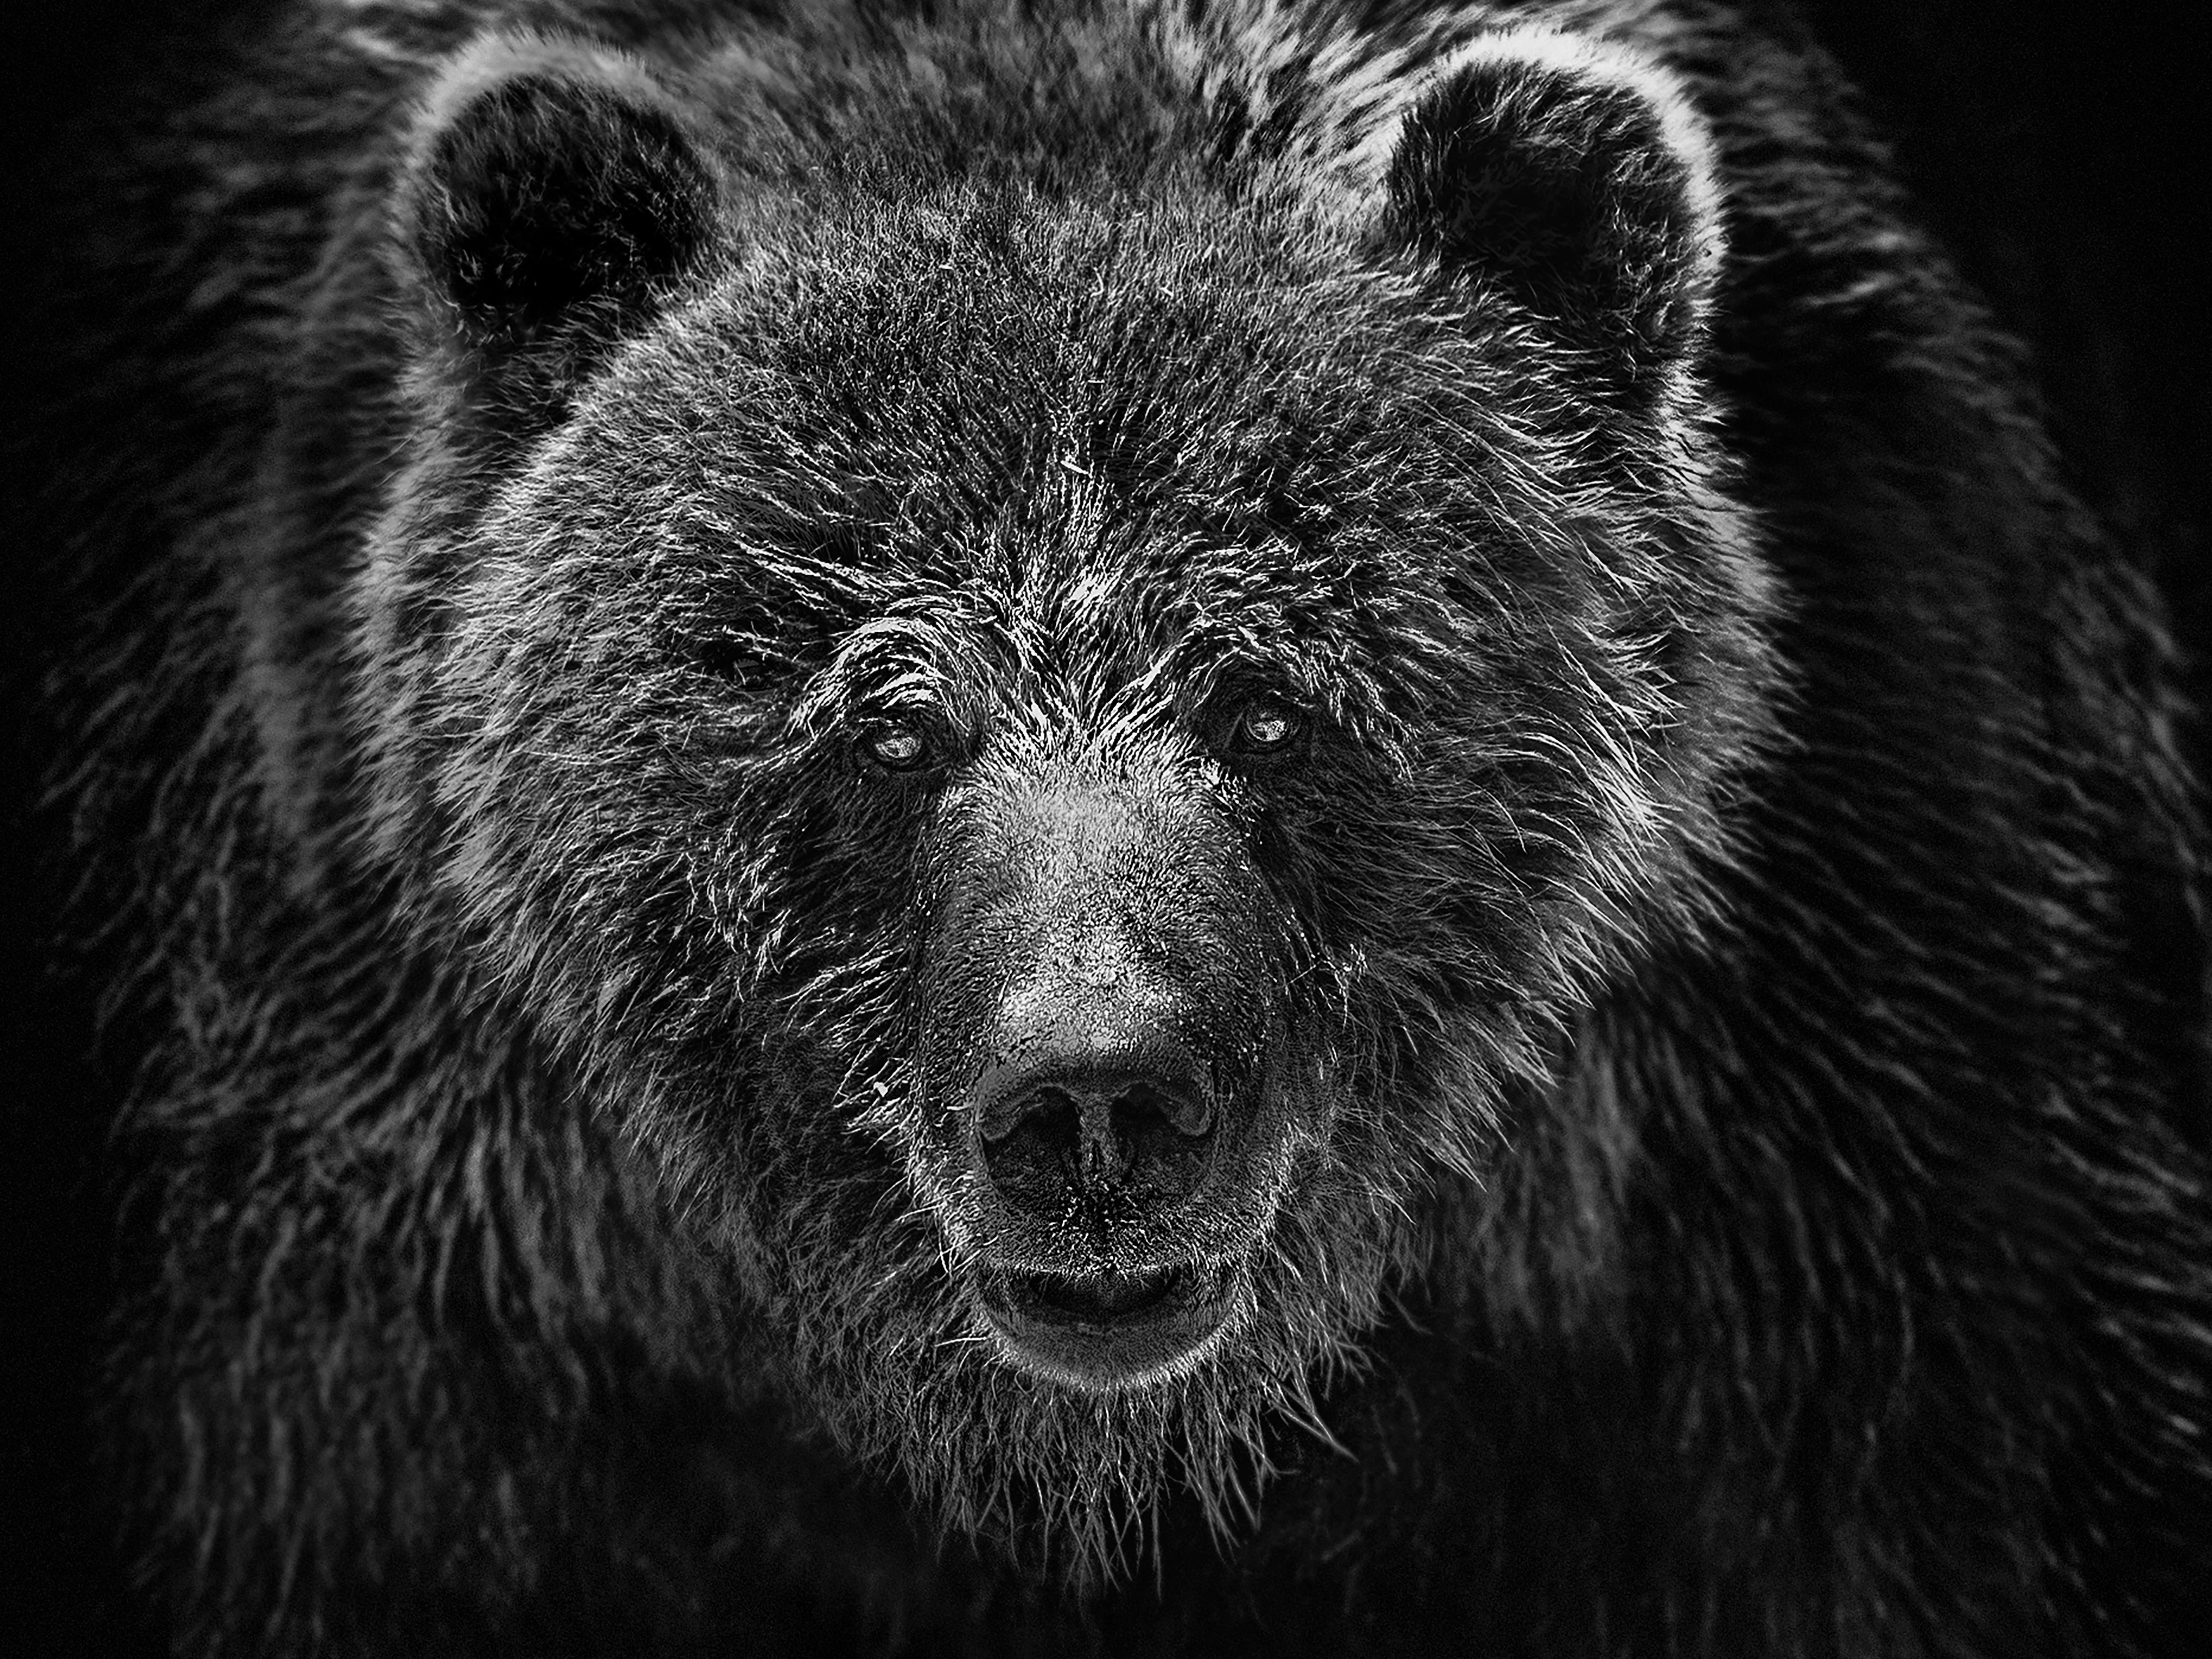 Shane Russeck Animal Print - "Grizzly Portrait" 60x40 - Black and White Photography Grizzly Bear Western Art